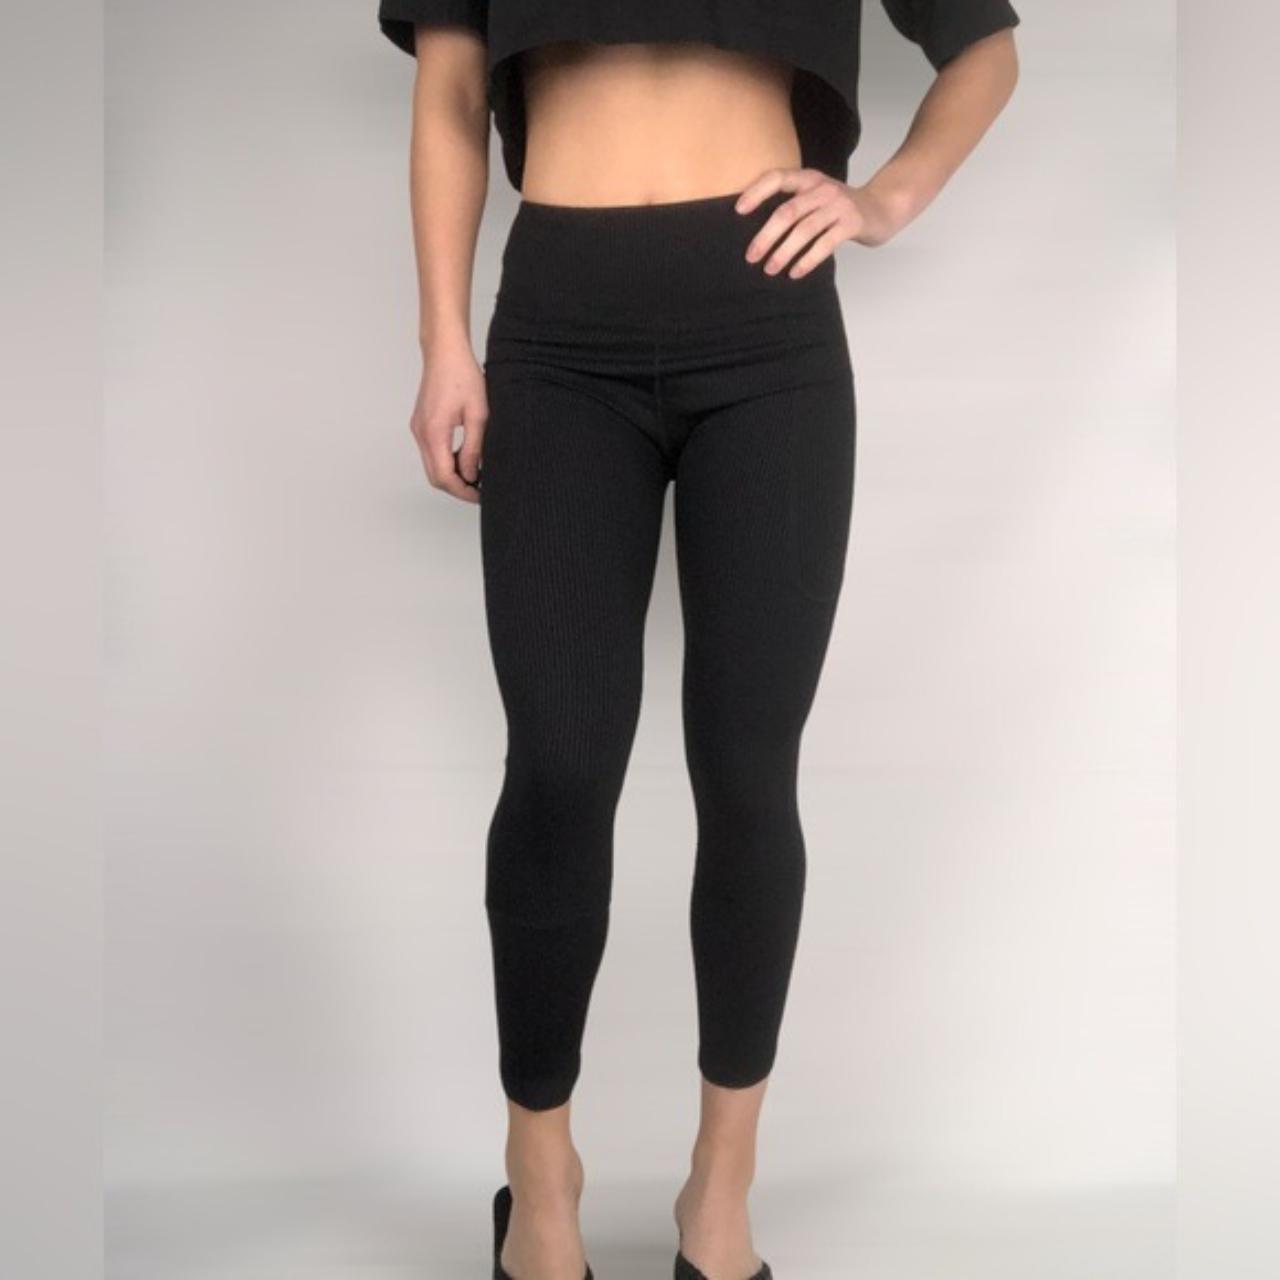 Undercover Hippie Uh Fit Booty Lift Legging, In